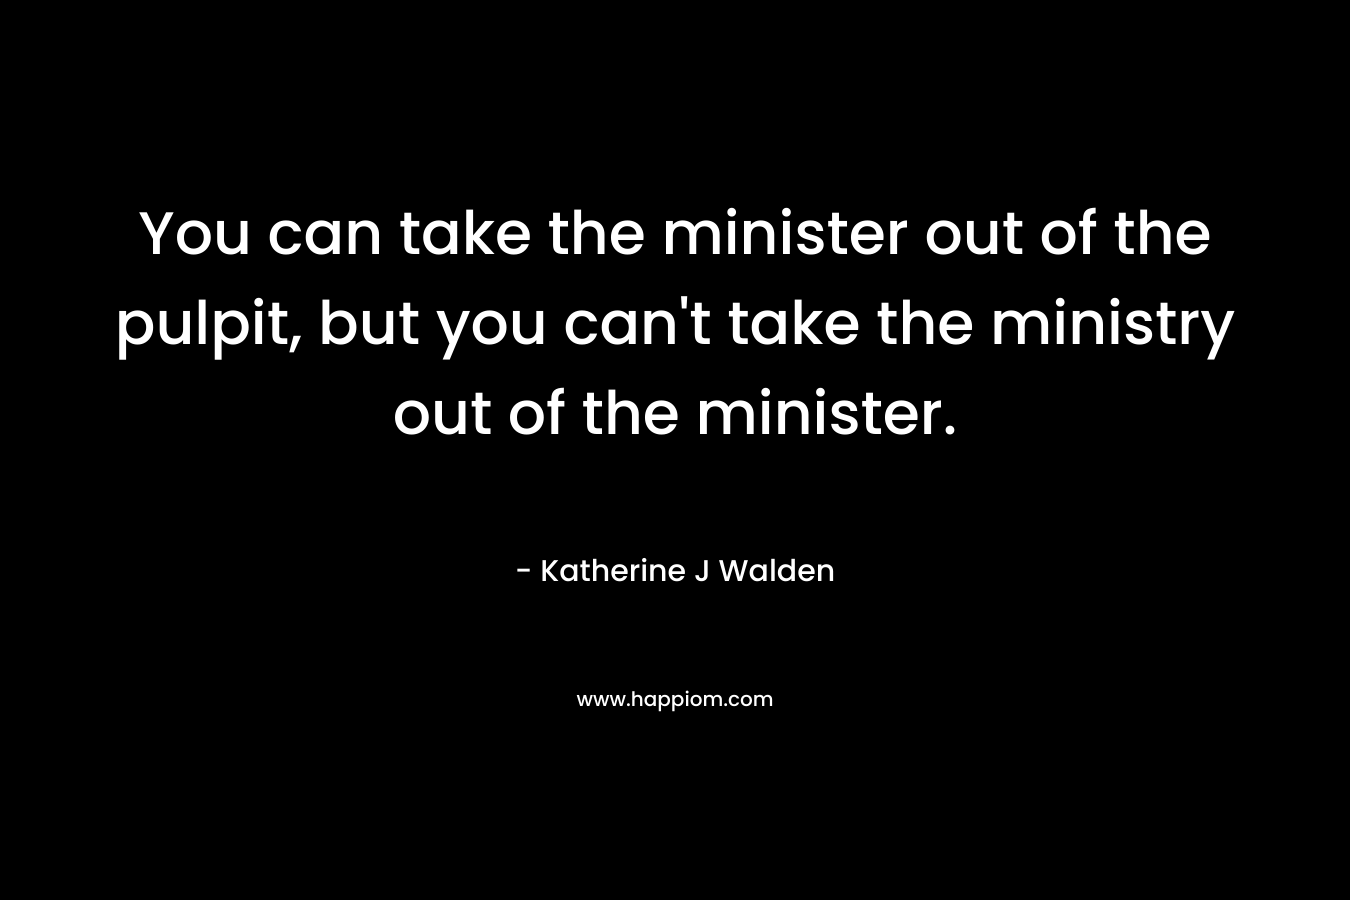 You can take the minister out of the pulpit, but you can't take the ministry out of the minister.